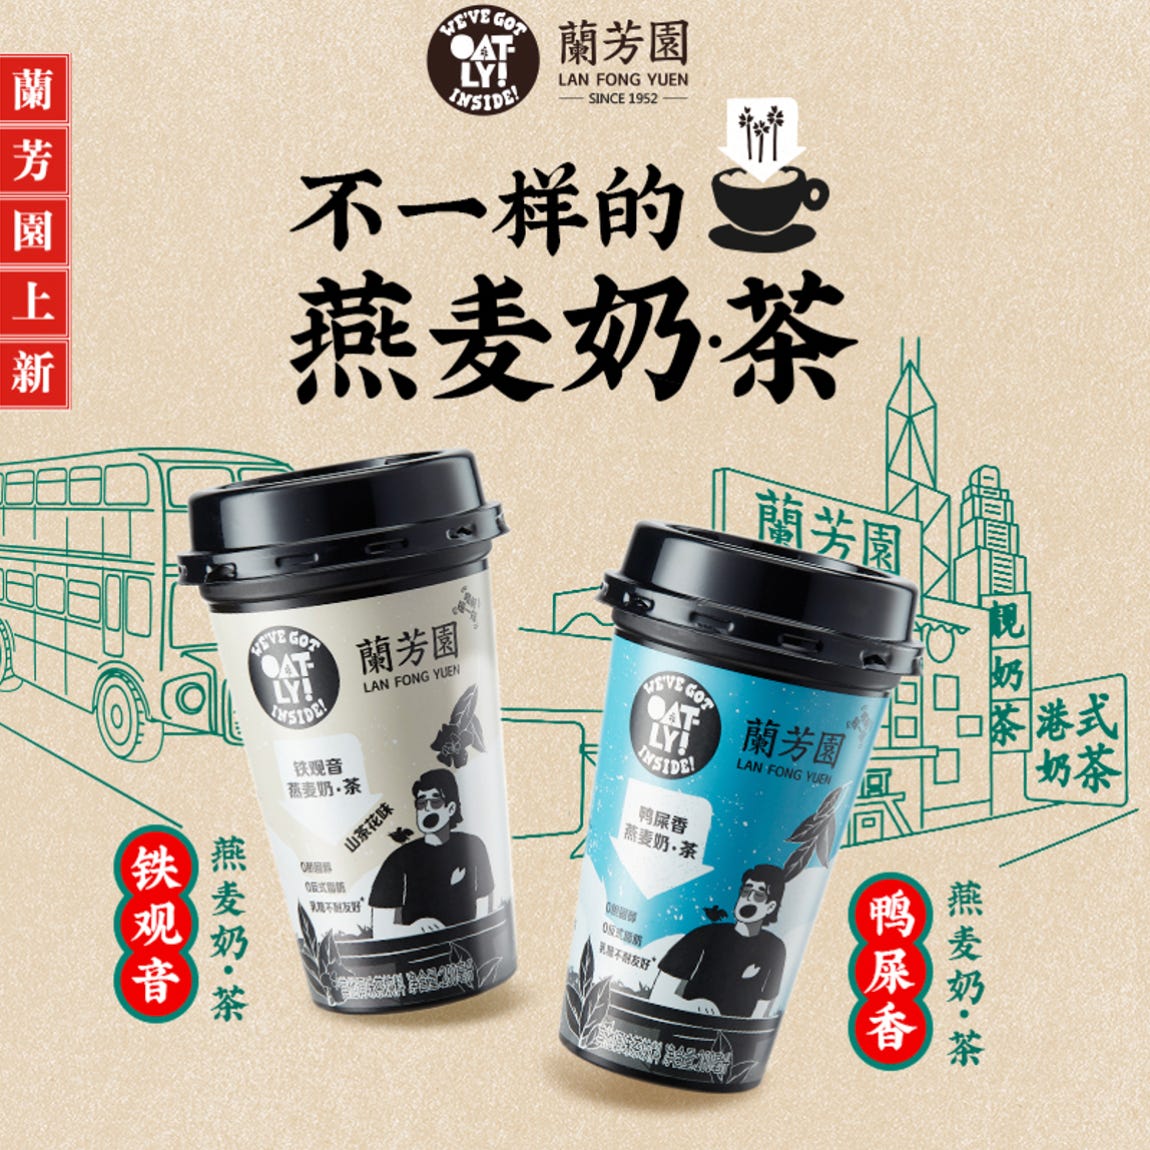 Introducing the Perfect Pairing for Coffee Lovers with Oatly